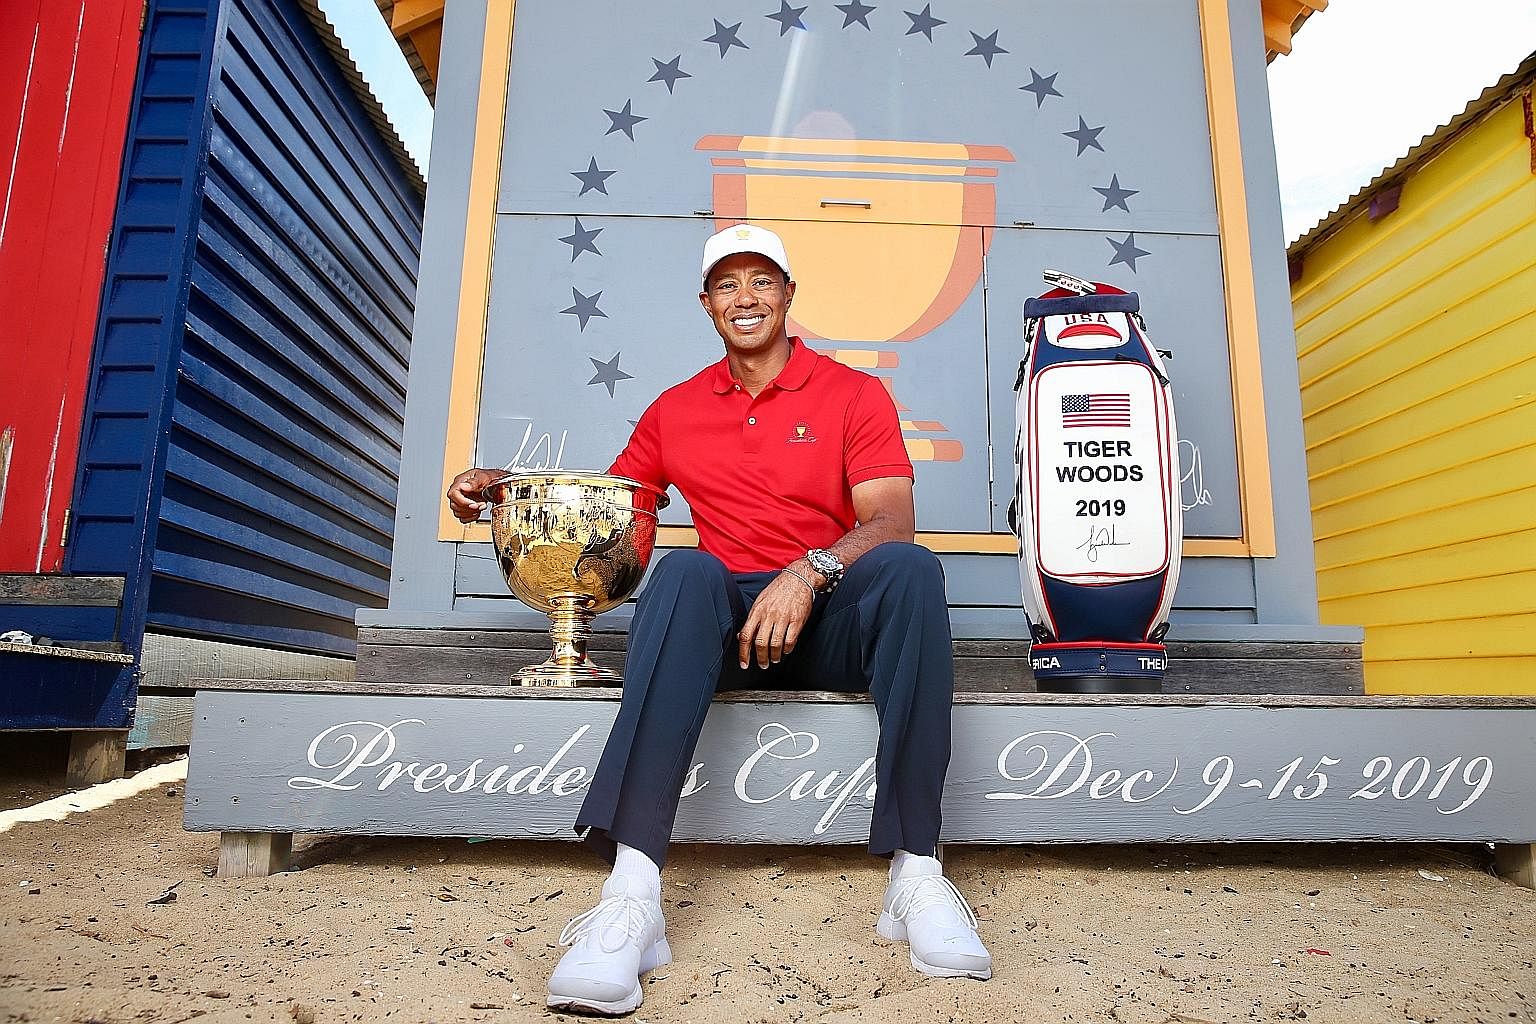 Presidents Cup US captain Tiger Woods is excited with the mix of veteran experience and young talent in his side for the Dec 9-15 tournament at the Royal Melbourne Golf Club.